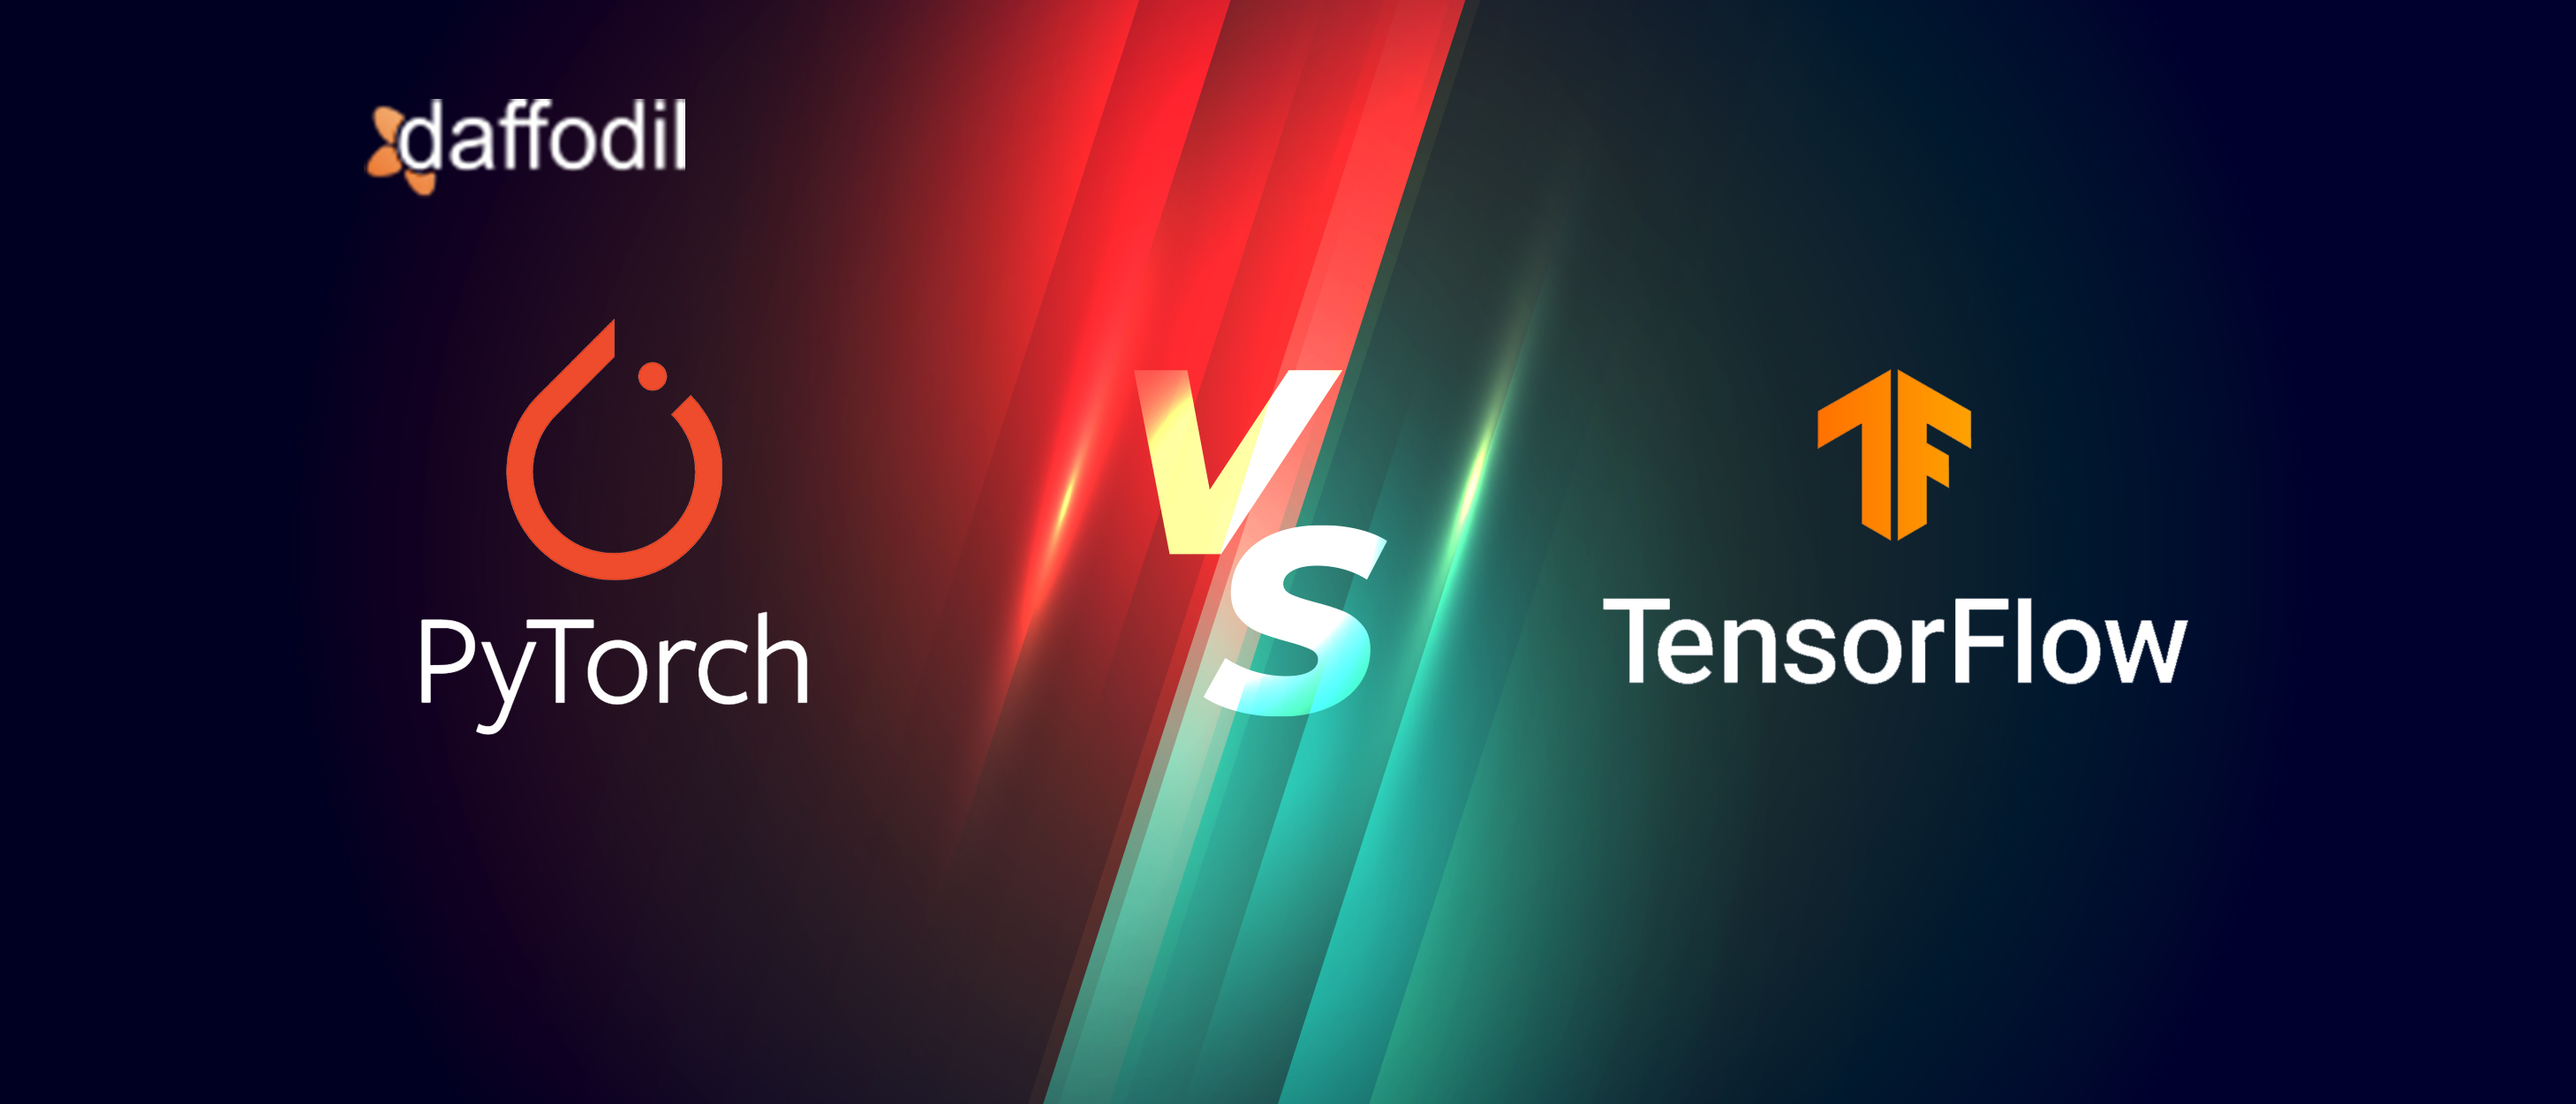 Pytorch Vs Tensorflow How To Choose Between These Deep Learning Frameworks